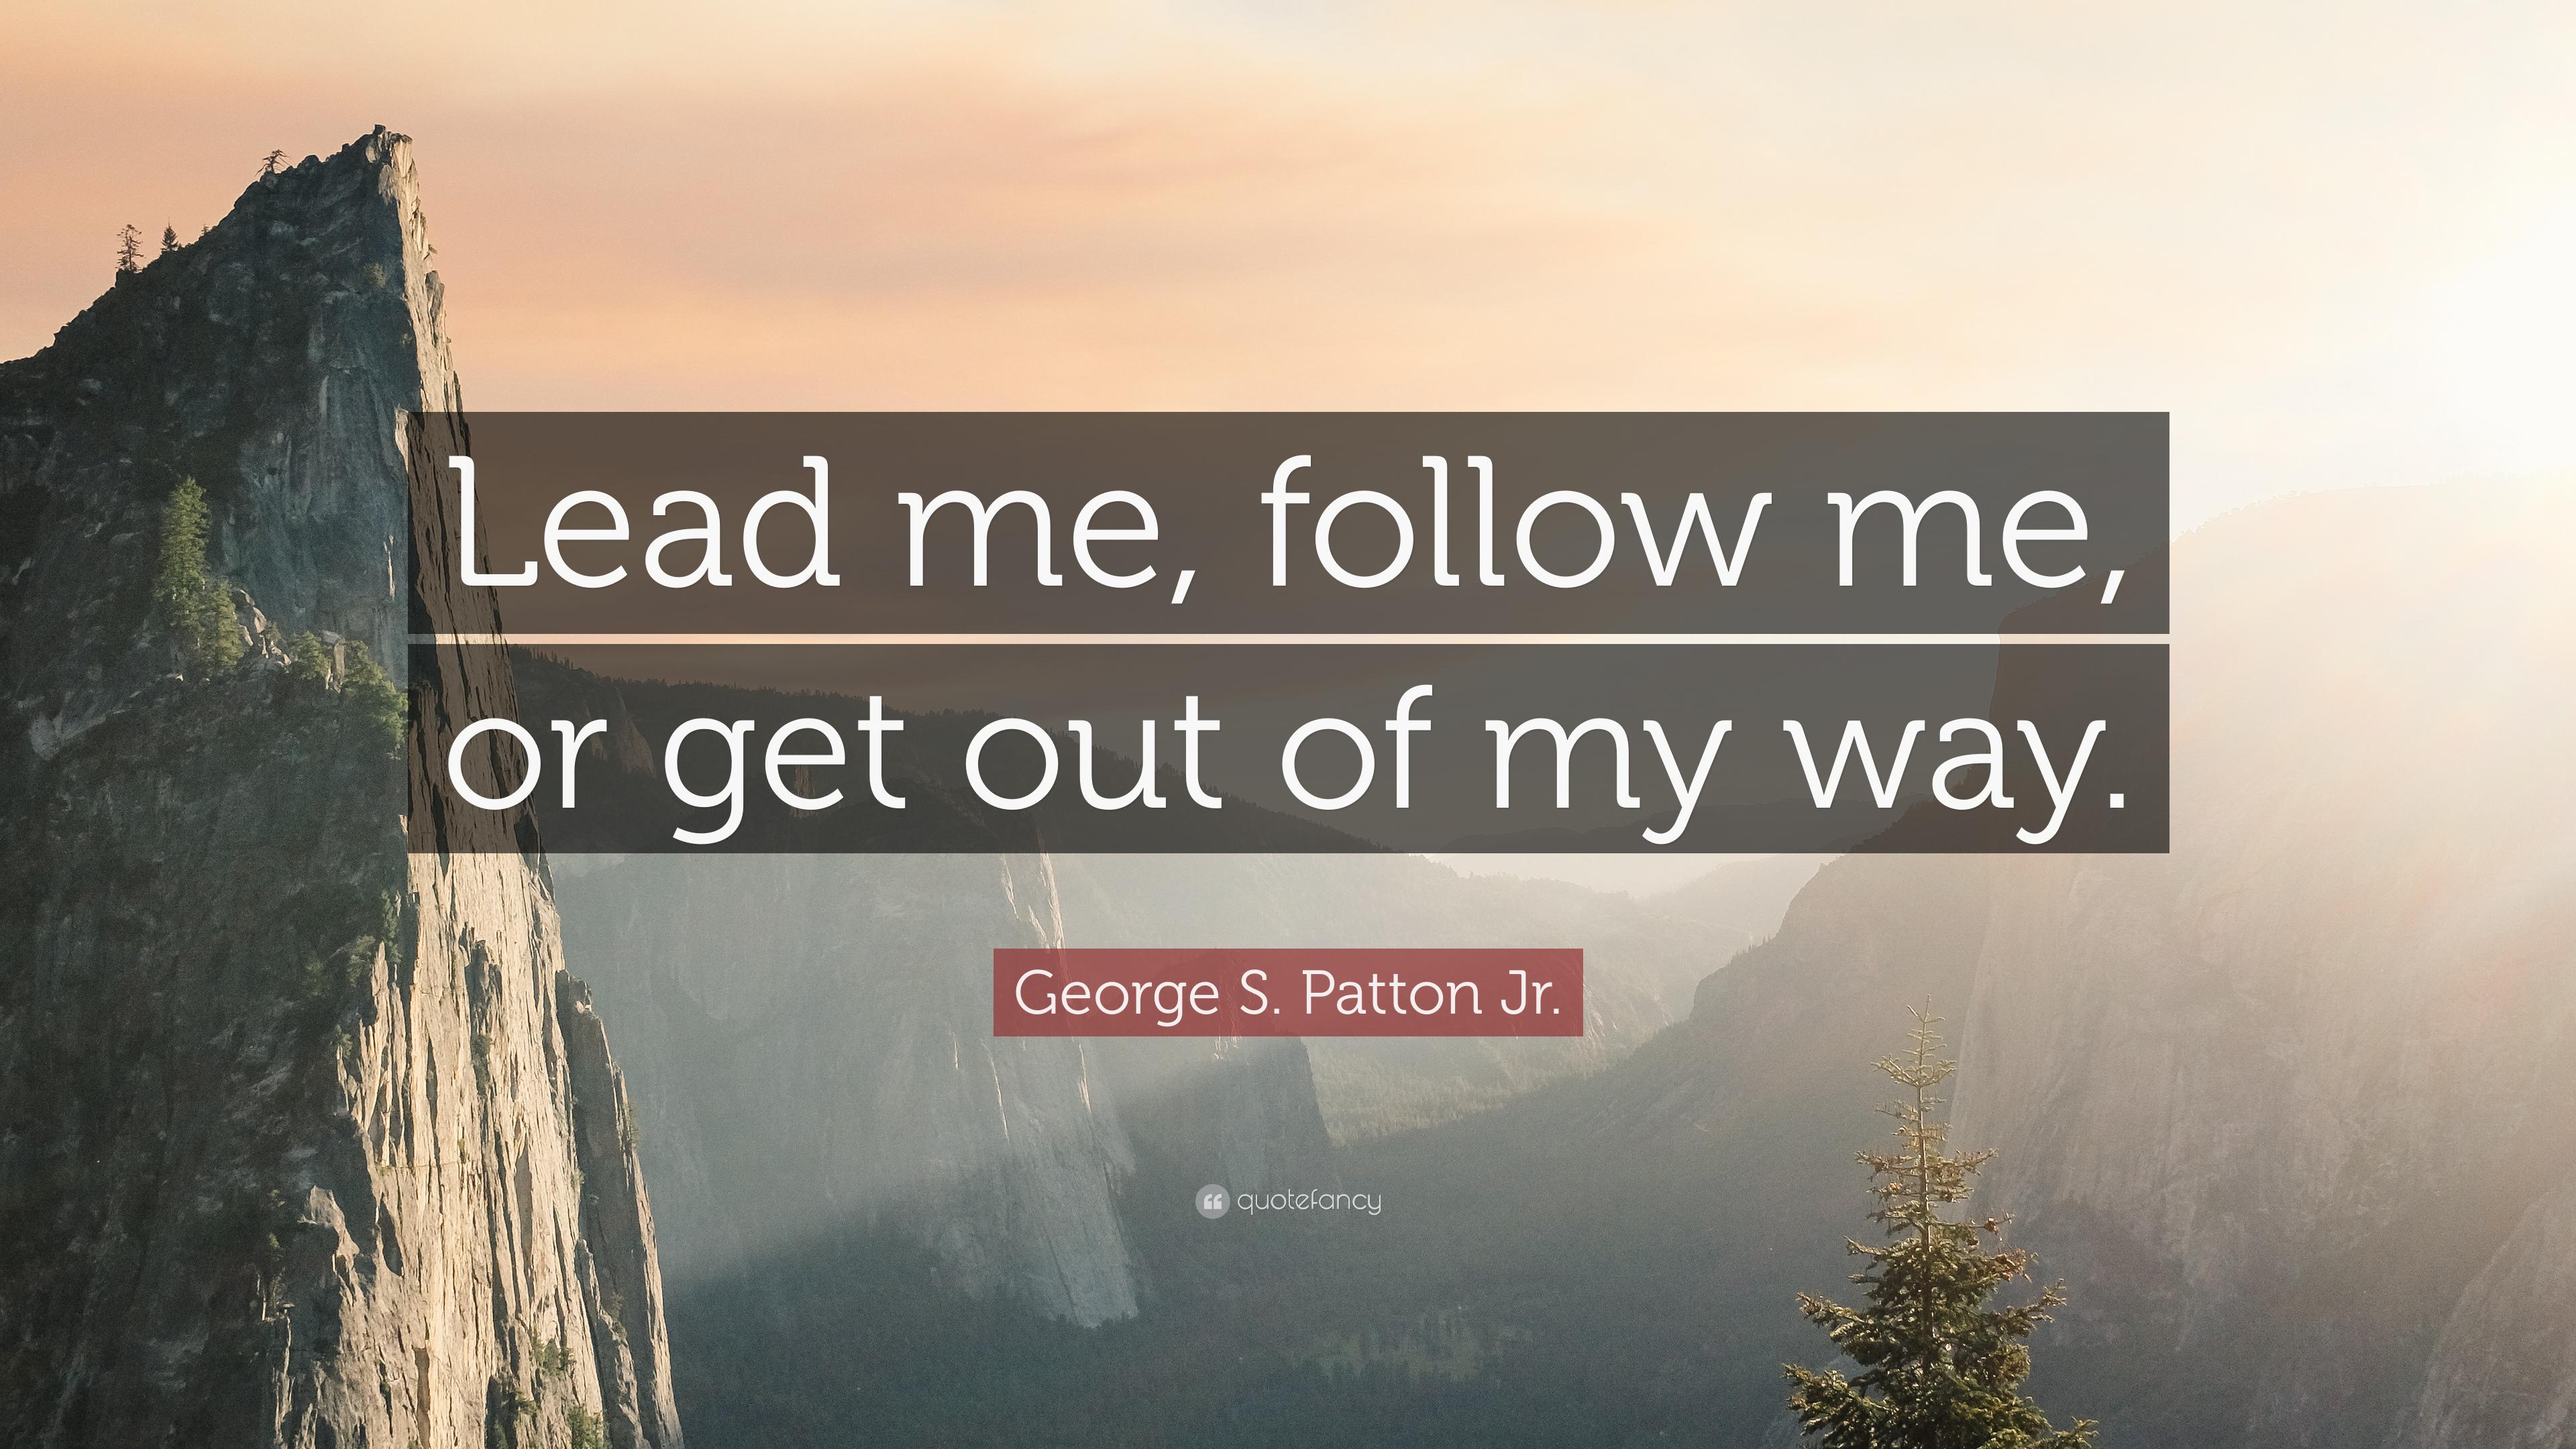 George S. Patton Jr. Quote: “Lead me, follow me, or get out of my